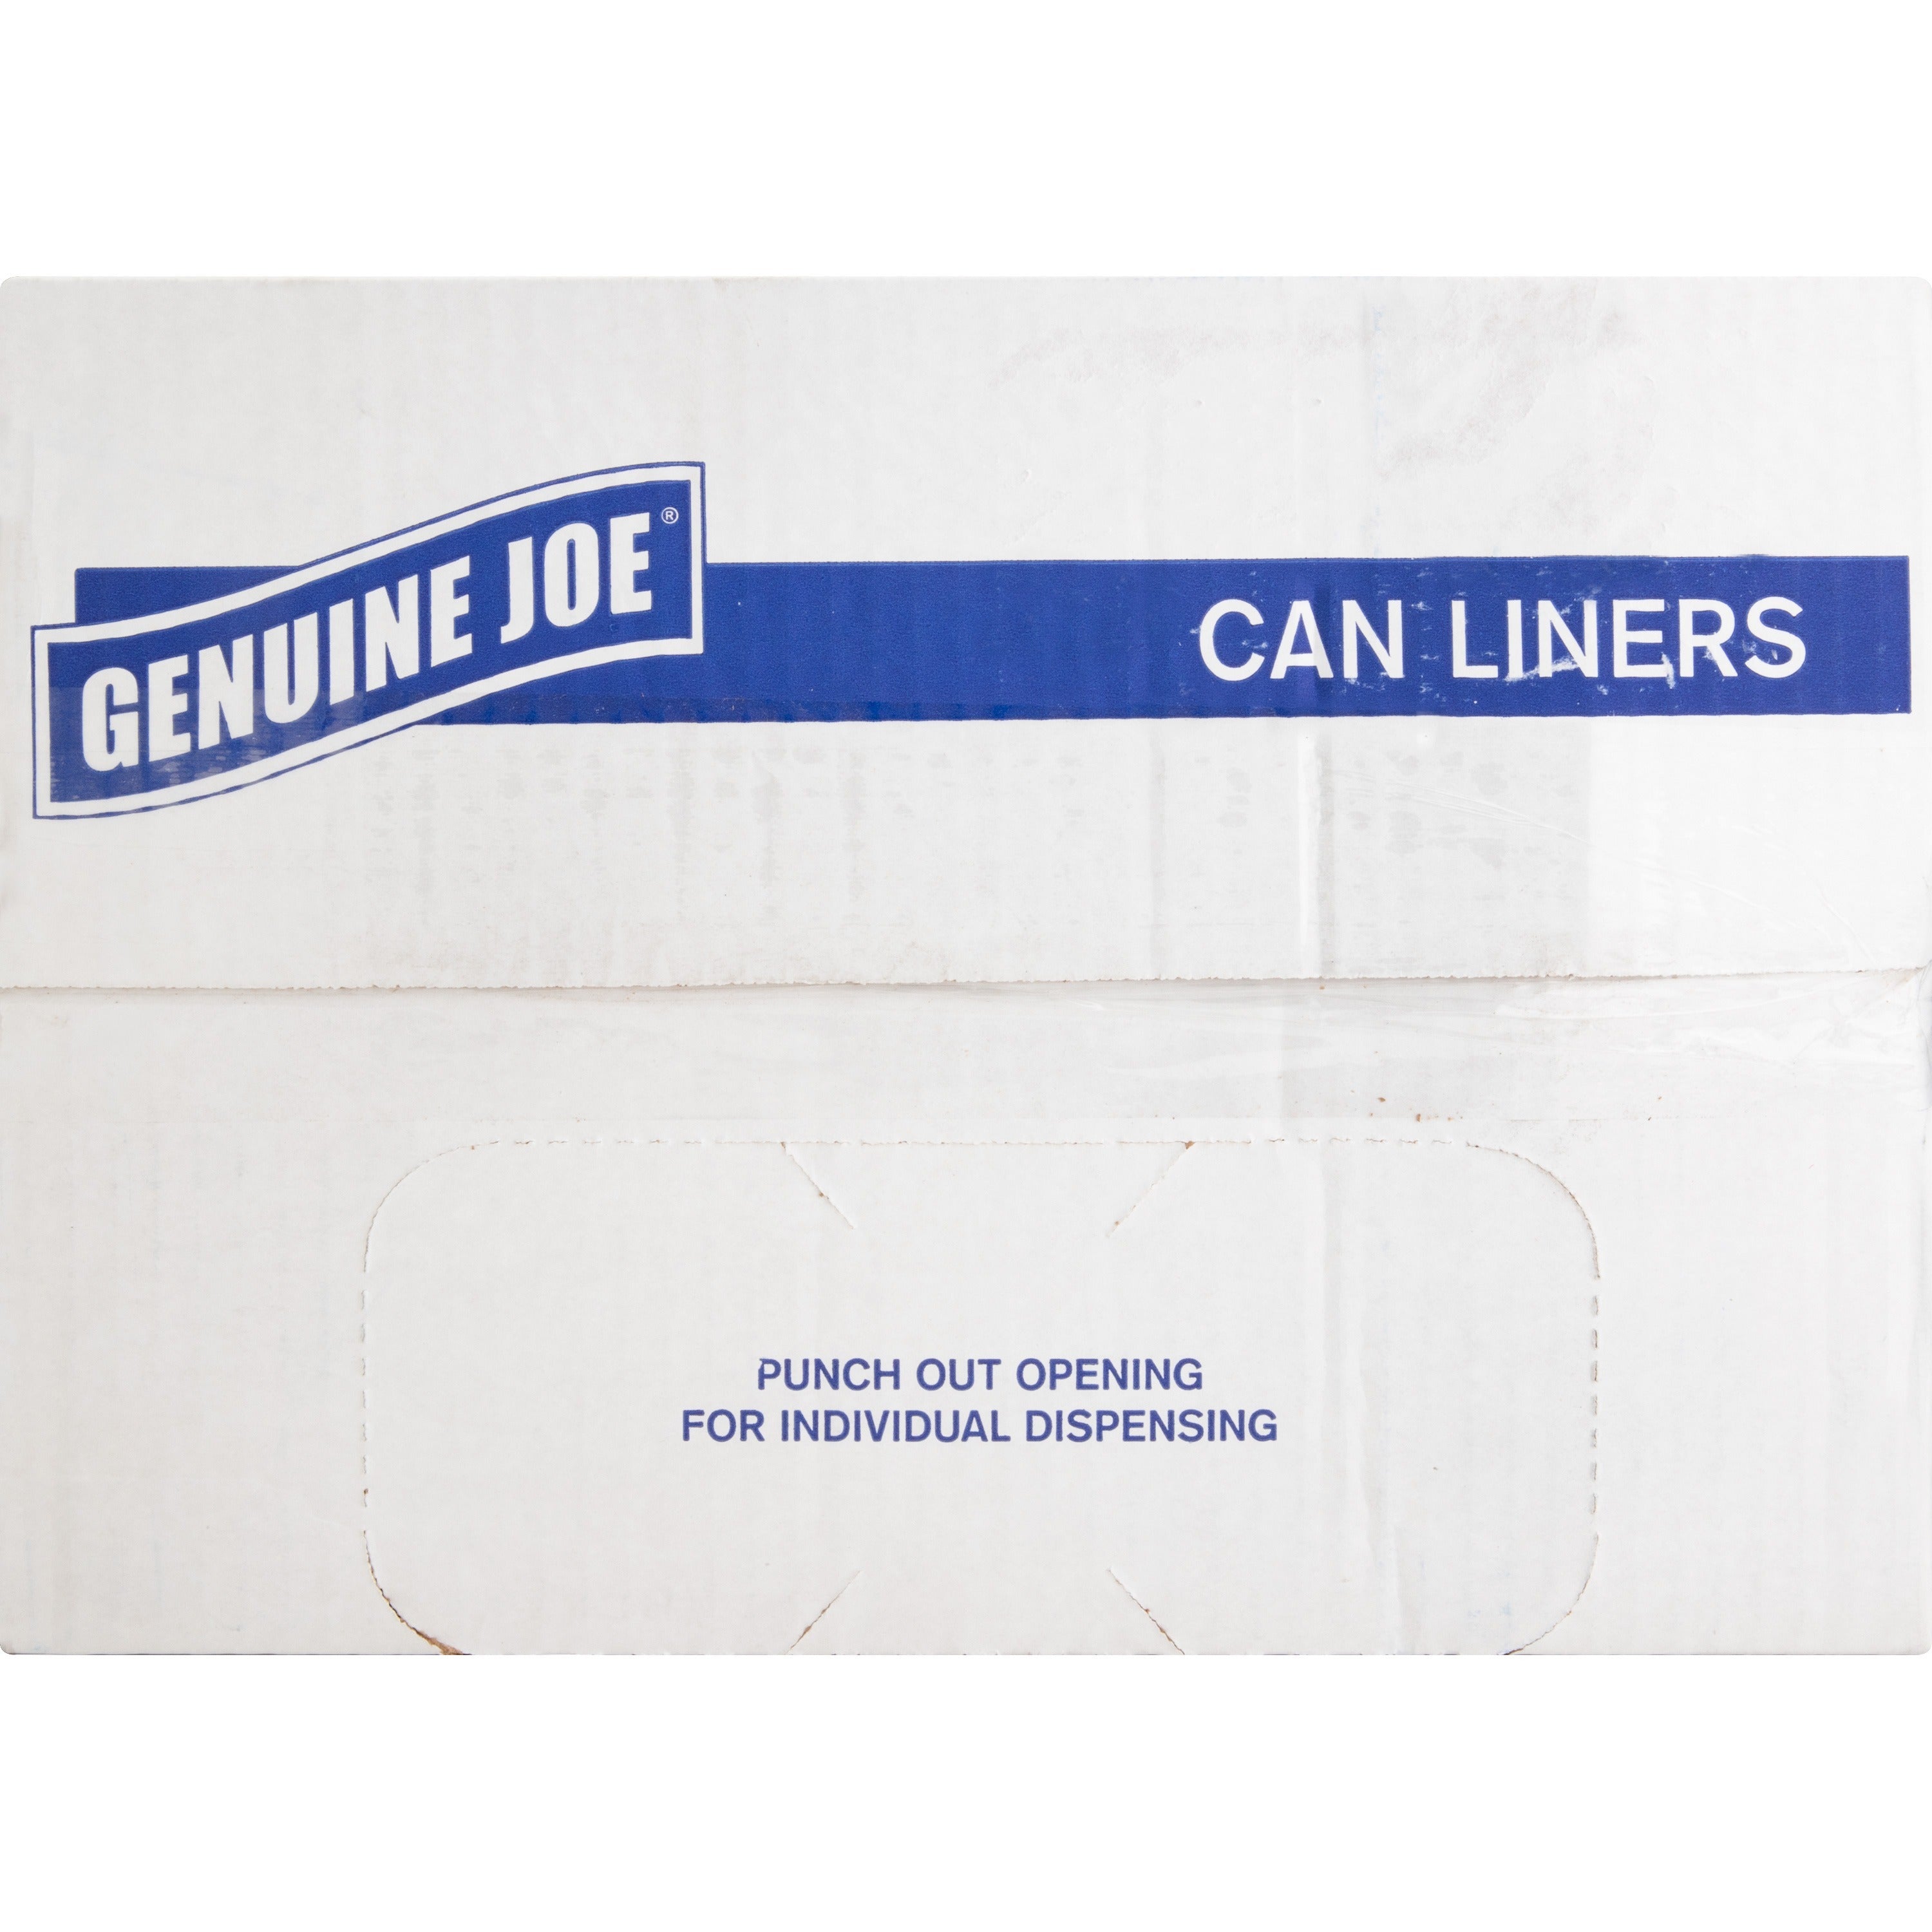 Genuine Joe Clear Trash Can Liners - Small Size - 16 gal Capacity - 24" Width x 33" Length - 0.60 mil (15 Micron) Thickness - Low Density - Clear - 500/Carton - 